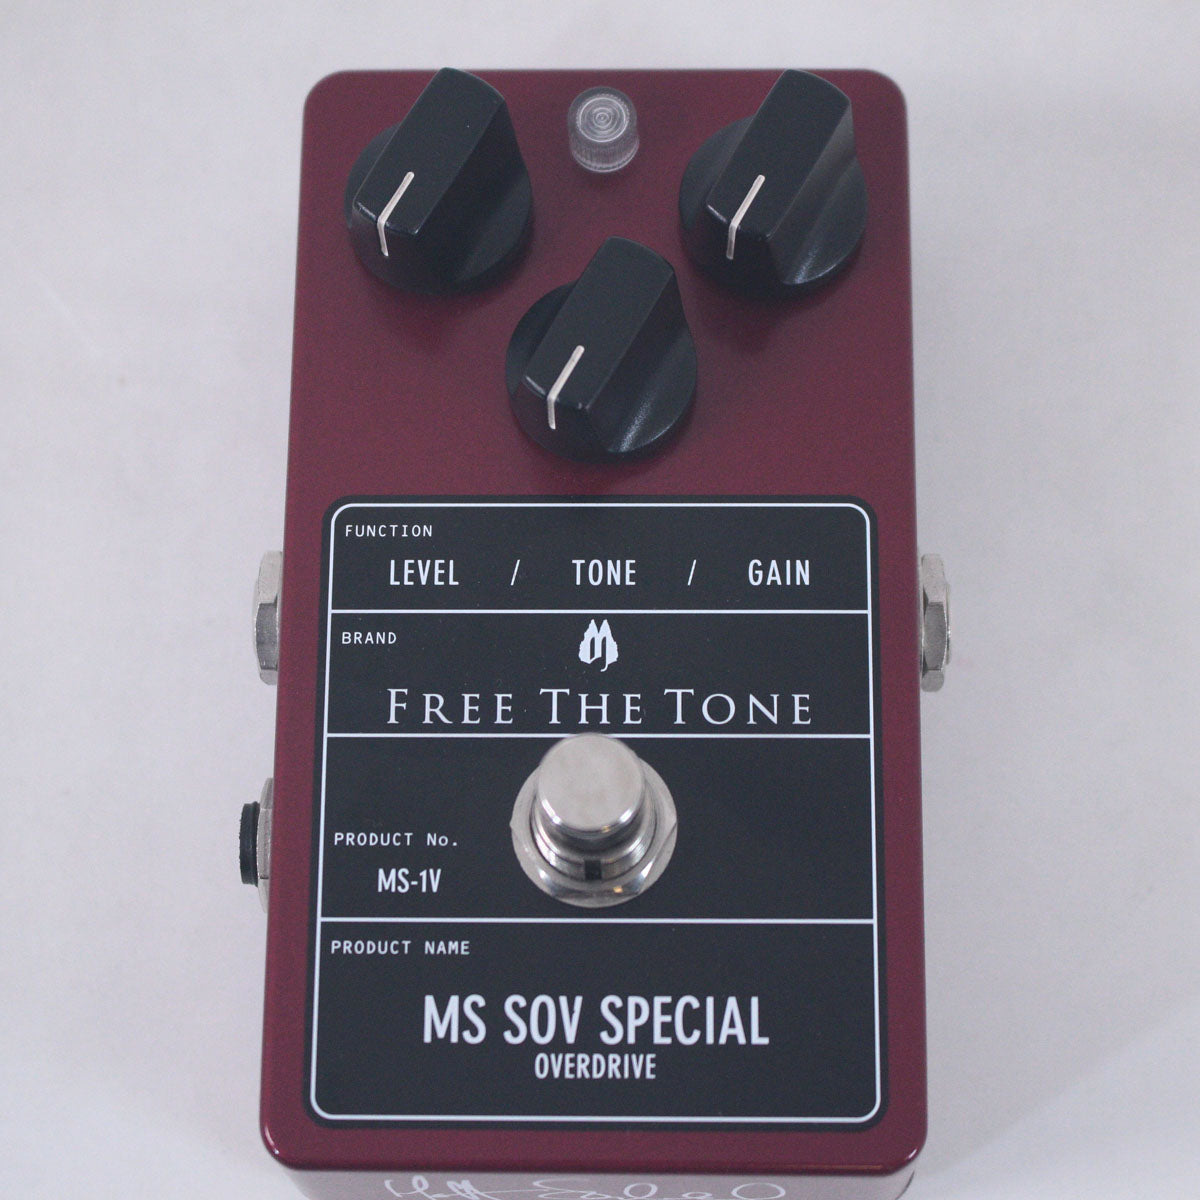 [SN MS308] USED FREE THE TONE / MS SOV SPECIAL MS-1V Over Drive [05]